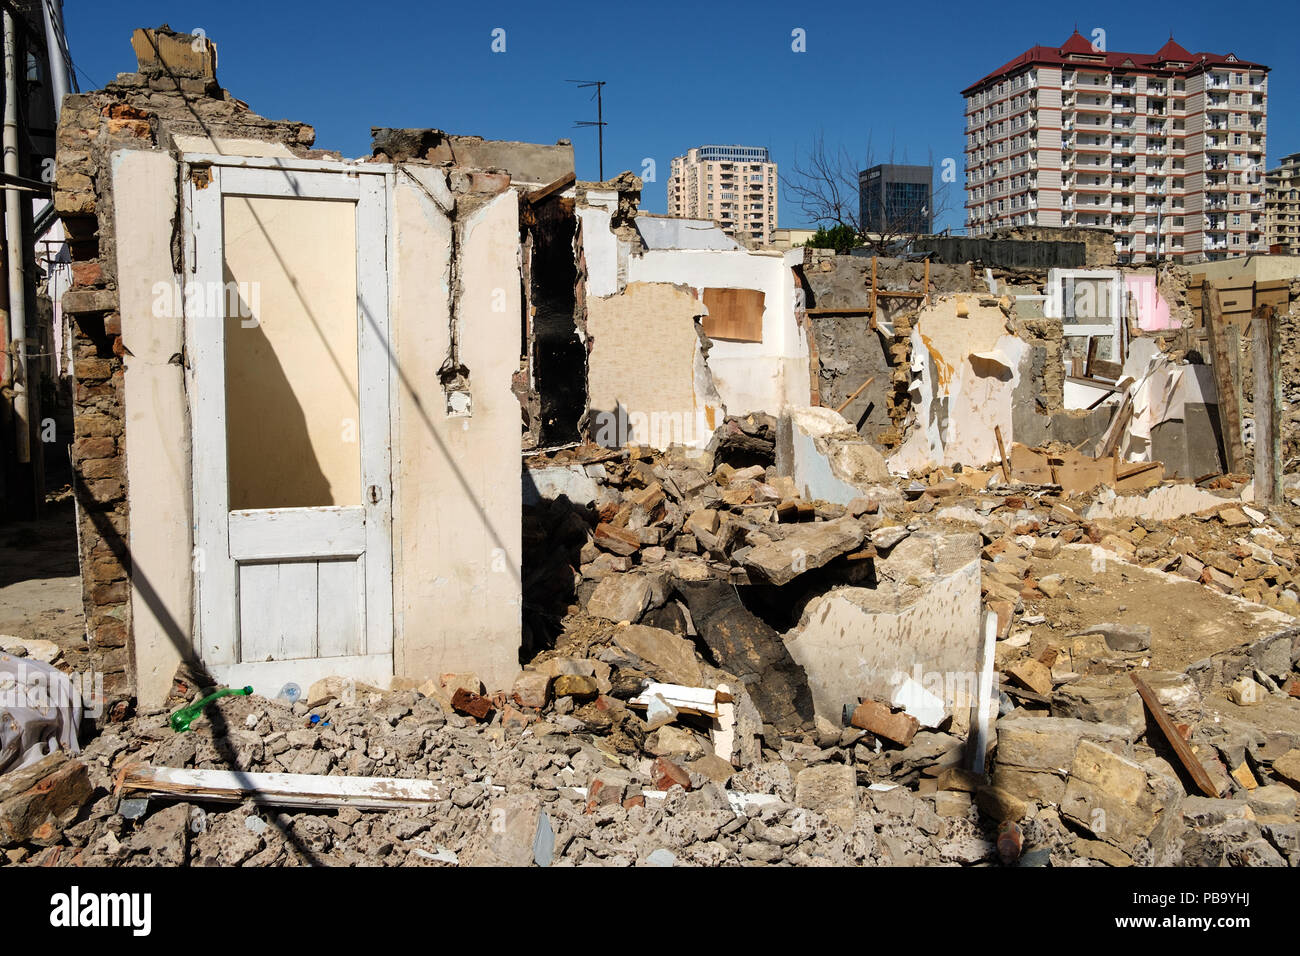 Demolition of an old residential neighbourhood in the city centre of Baku, Azerbaijan to make space for a construction of new bulidings. Stock Photo